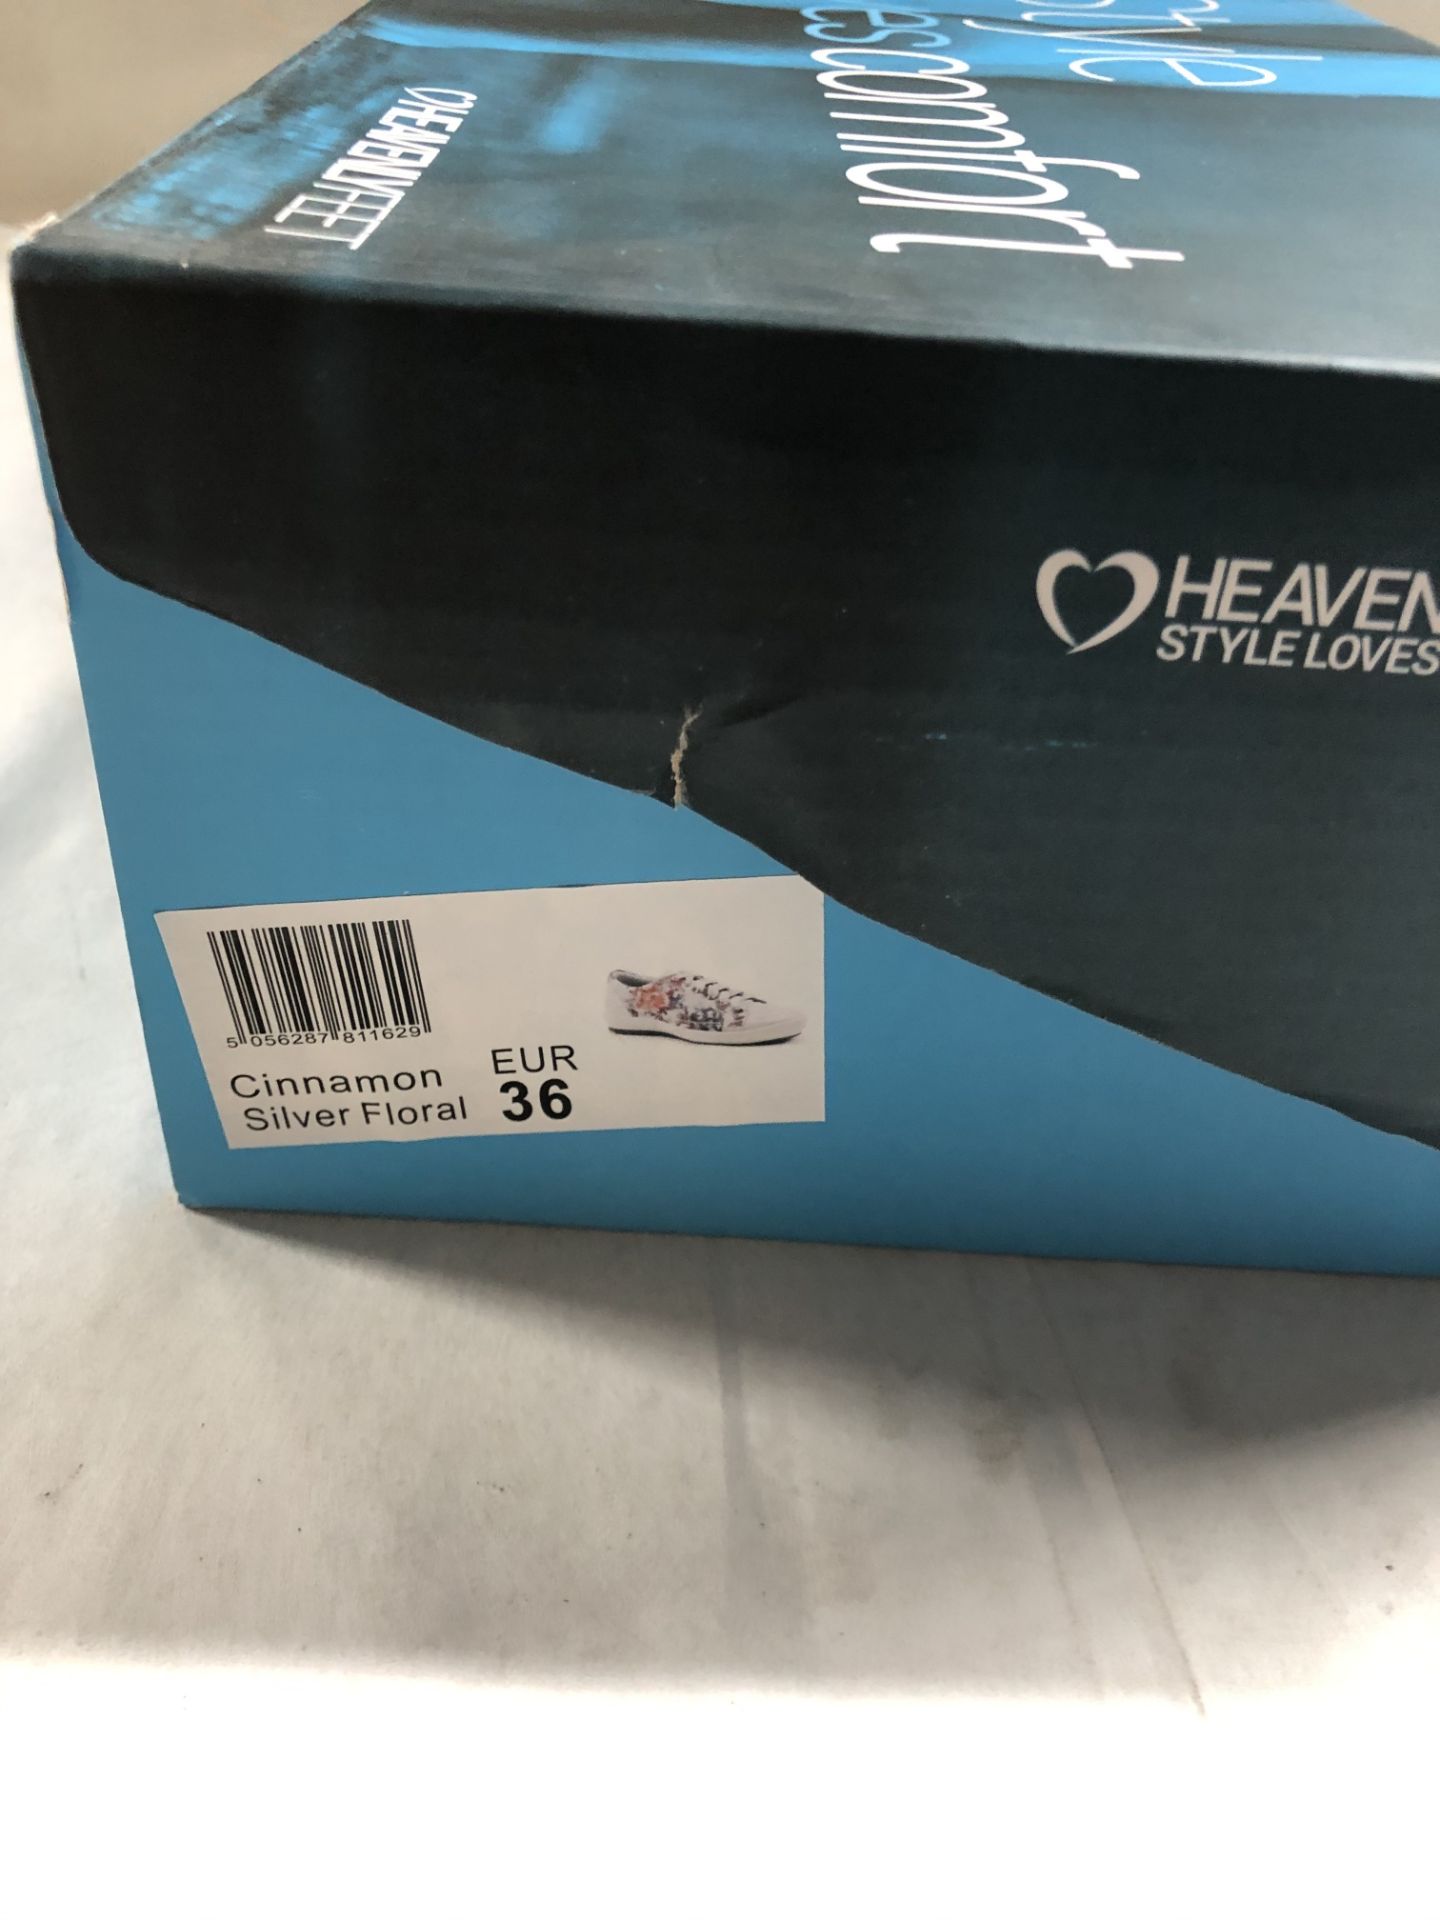 Heavenly Feet Trainers. Eur 36 - Image 3 of 3